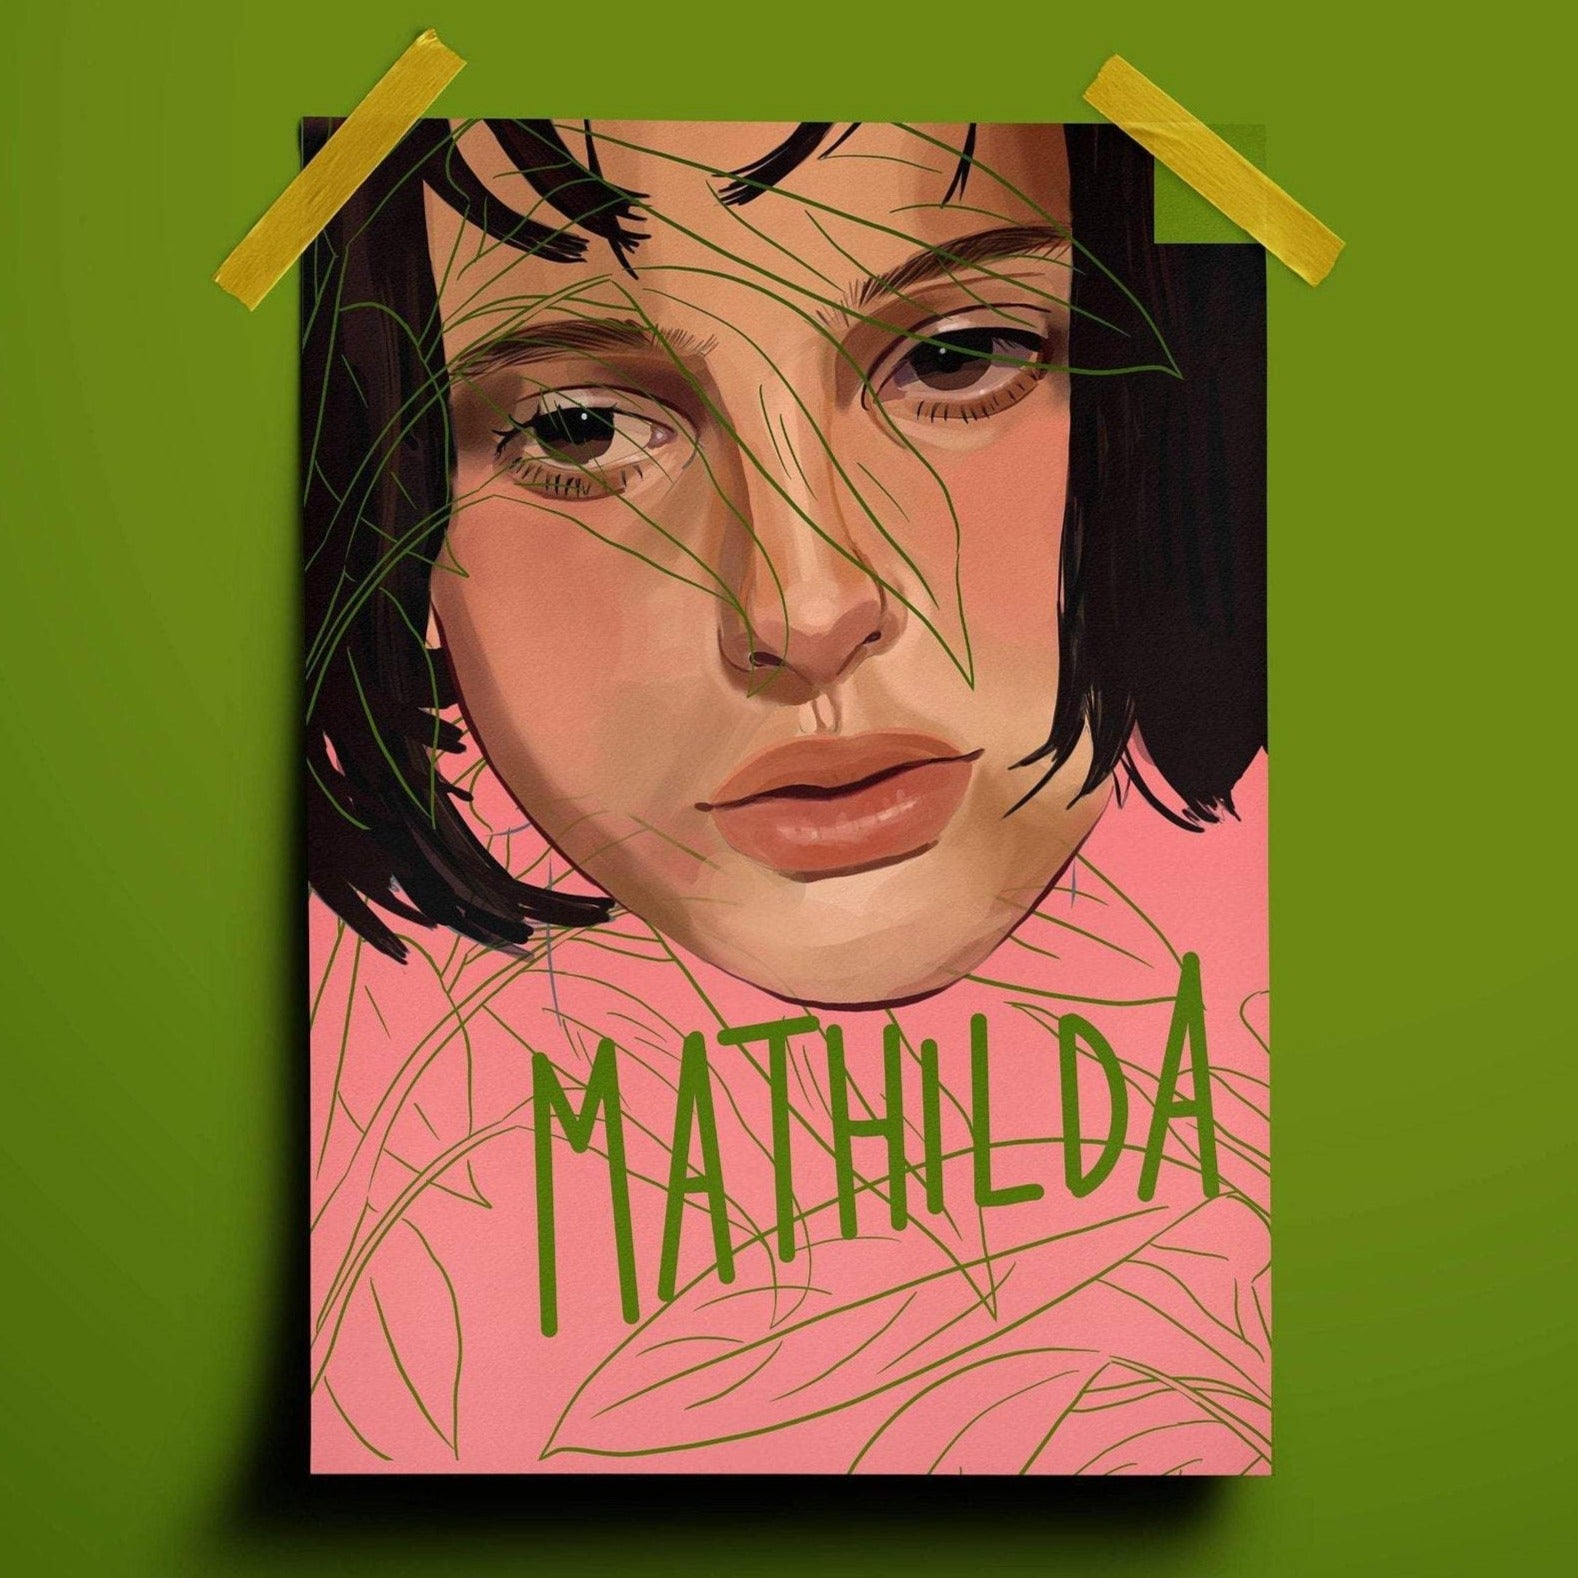 illustration print of natalie portman as mathilda in leon the professional. the background behind her is pink and she is overlaid with a line drawing of some plants. her name is written in green capital hand lettered text beneath her face.